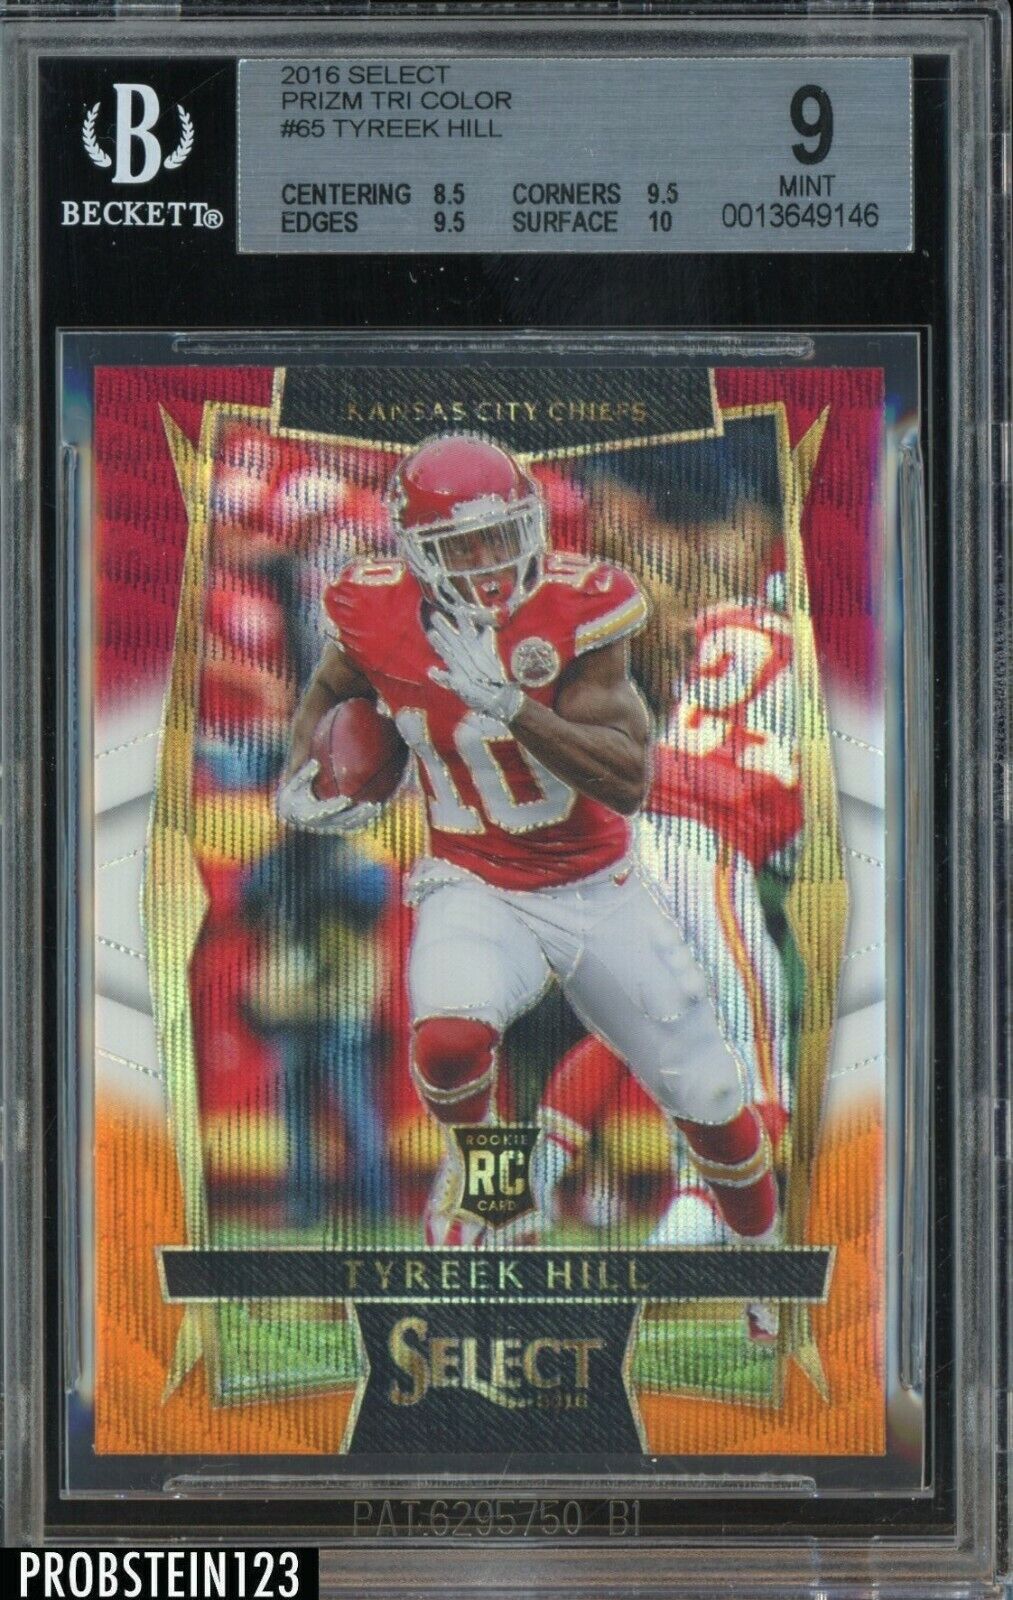 2016 Panini Select Tri-Color Prizm #65 Tyreek Hill Chiefs RC Rookie BGS 9 w/ 10